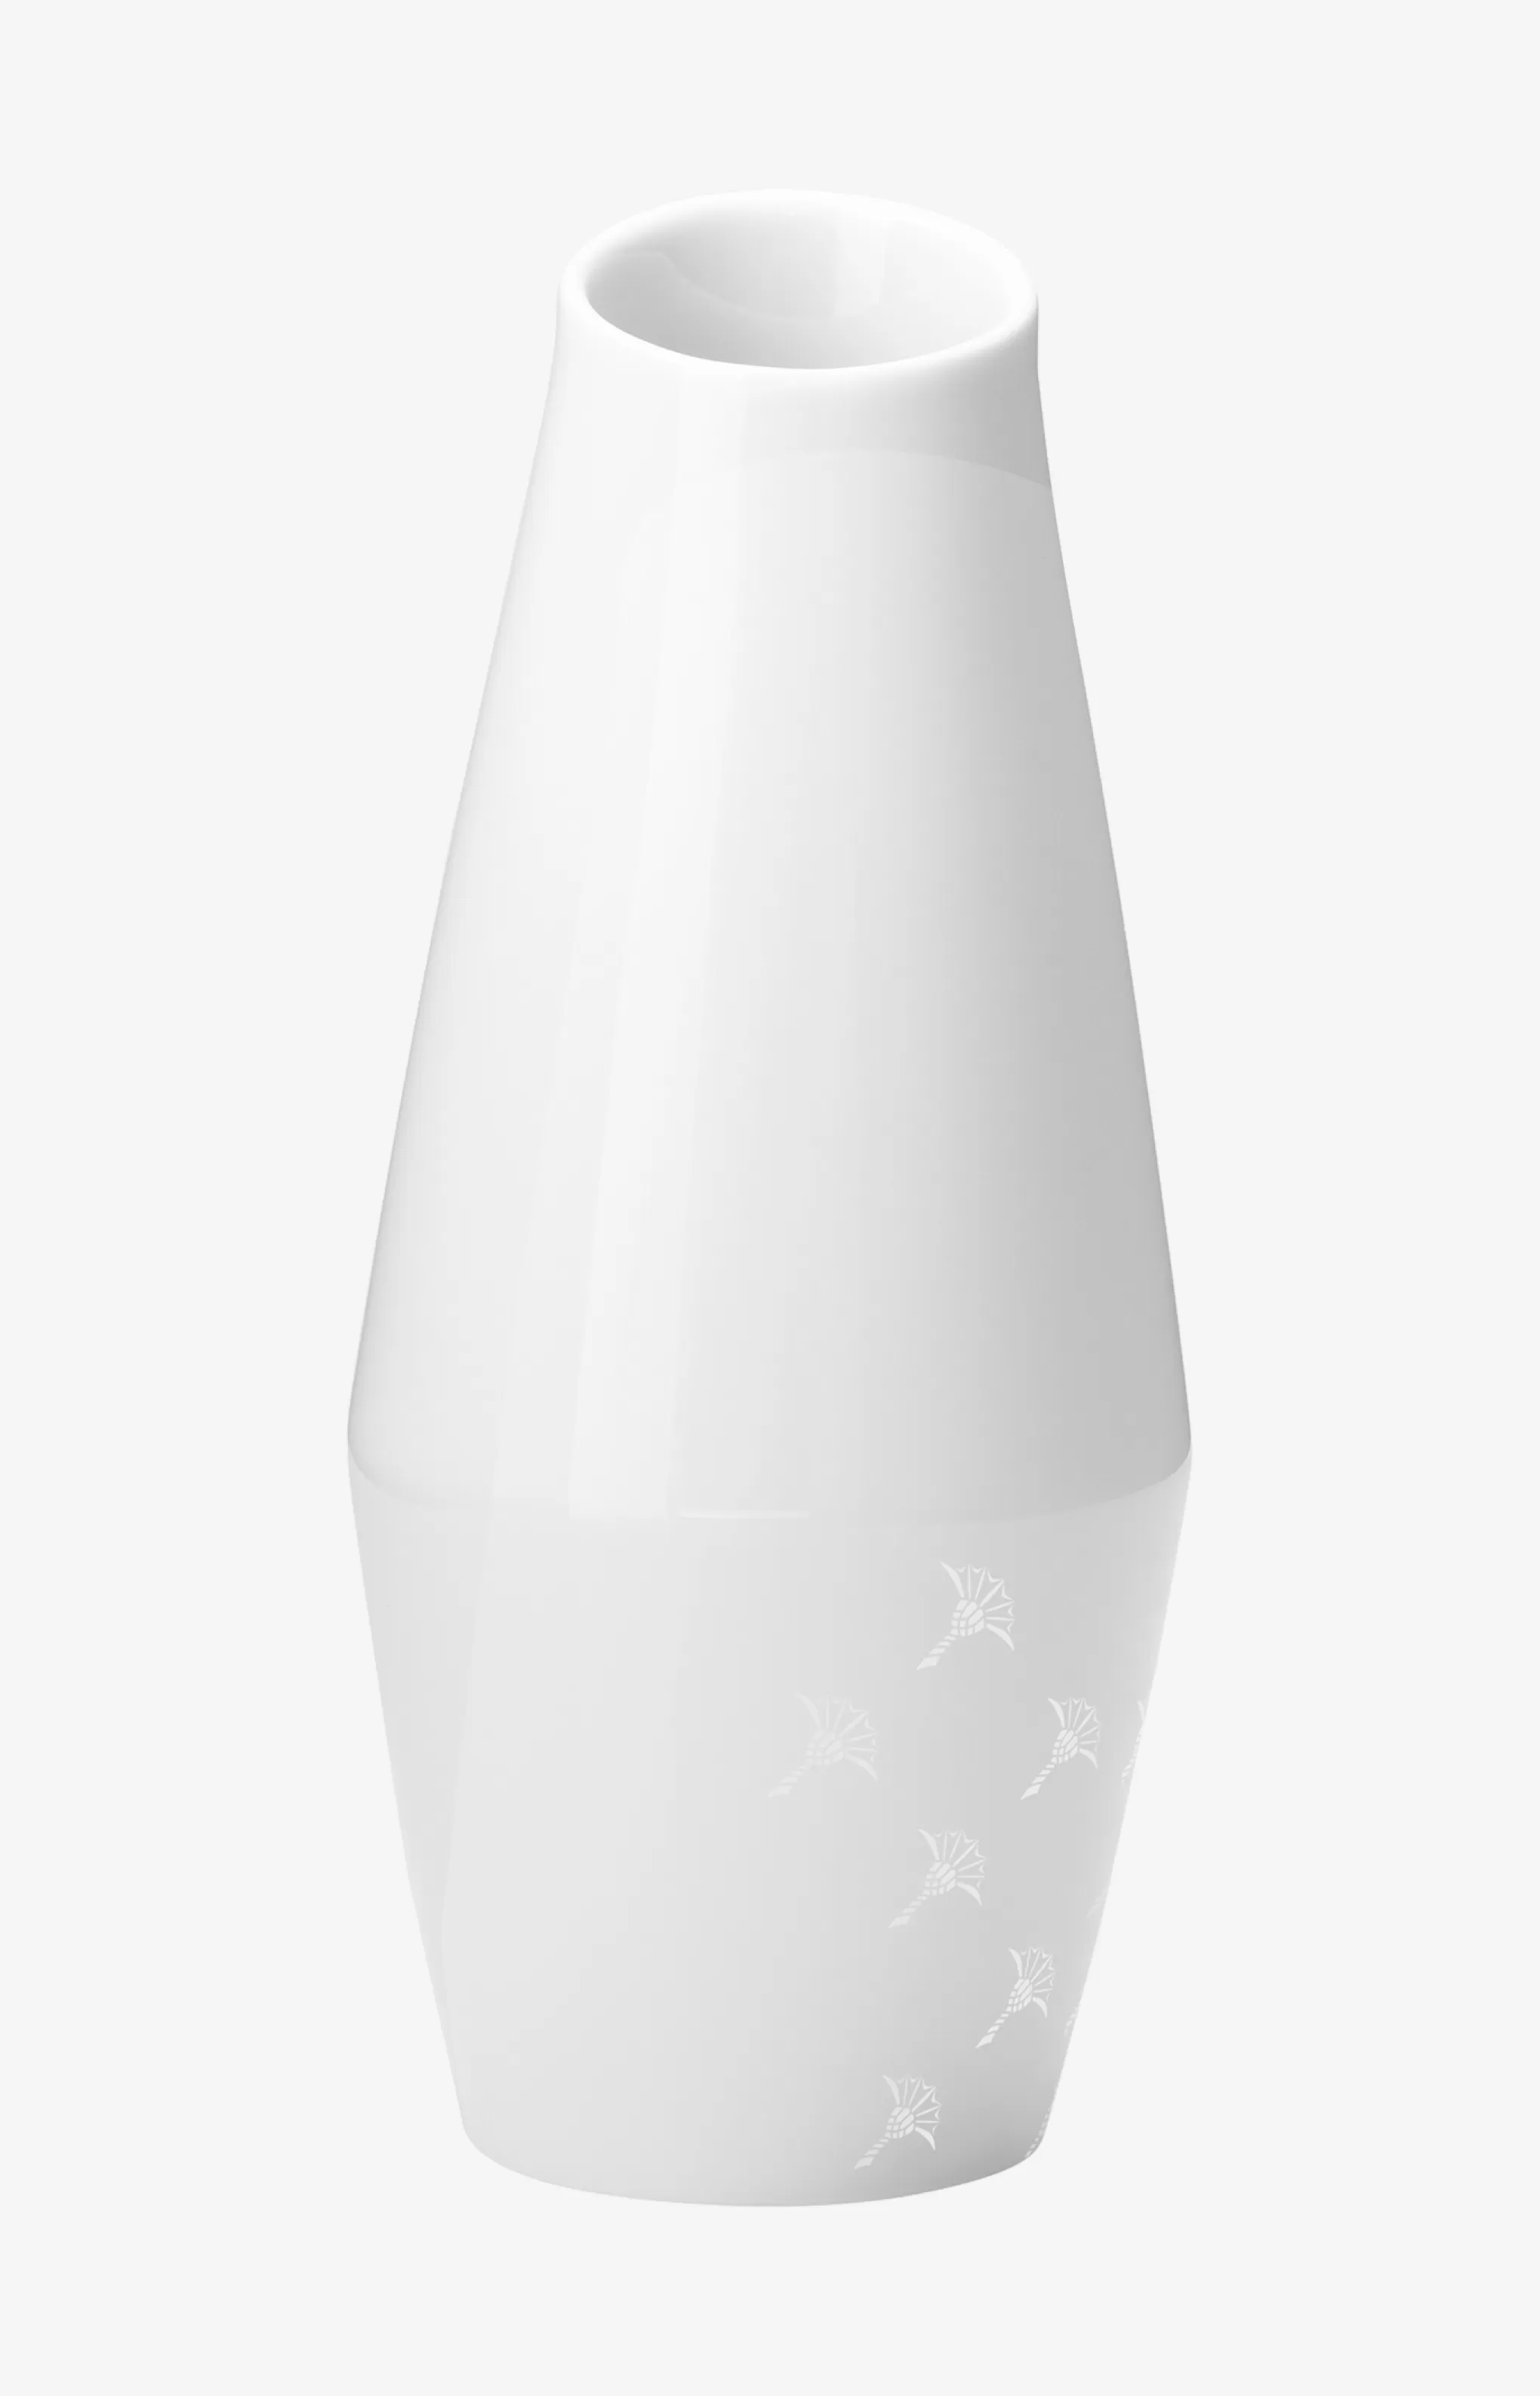 Tableware | Discover Everything*JOOP Tableware | Discover Everything Faded Cornflower Carafe/Vase in - 18 cm height